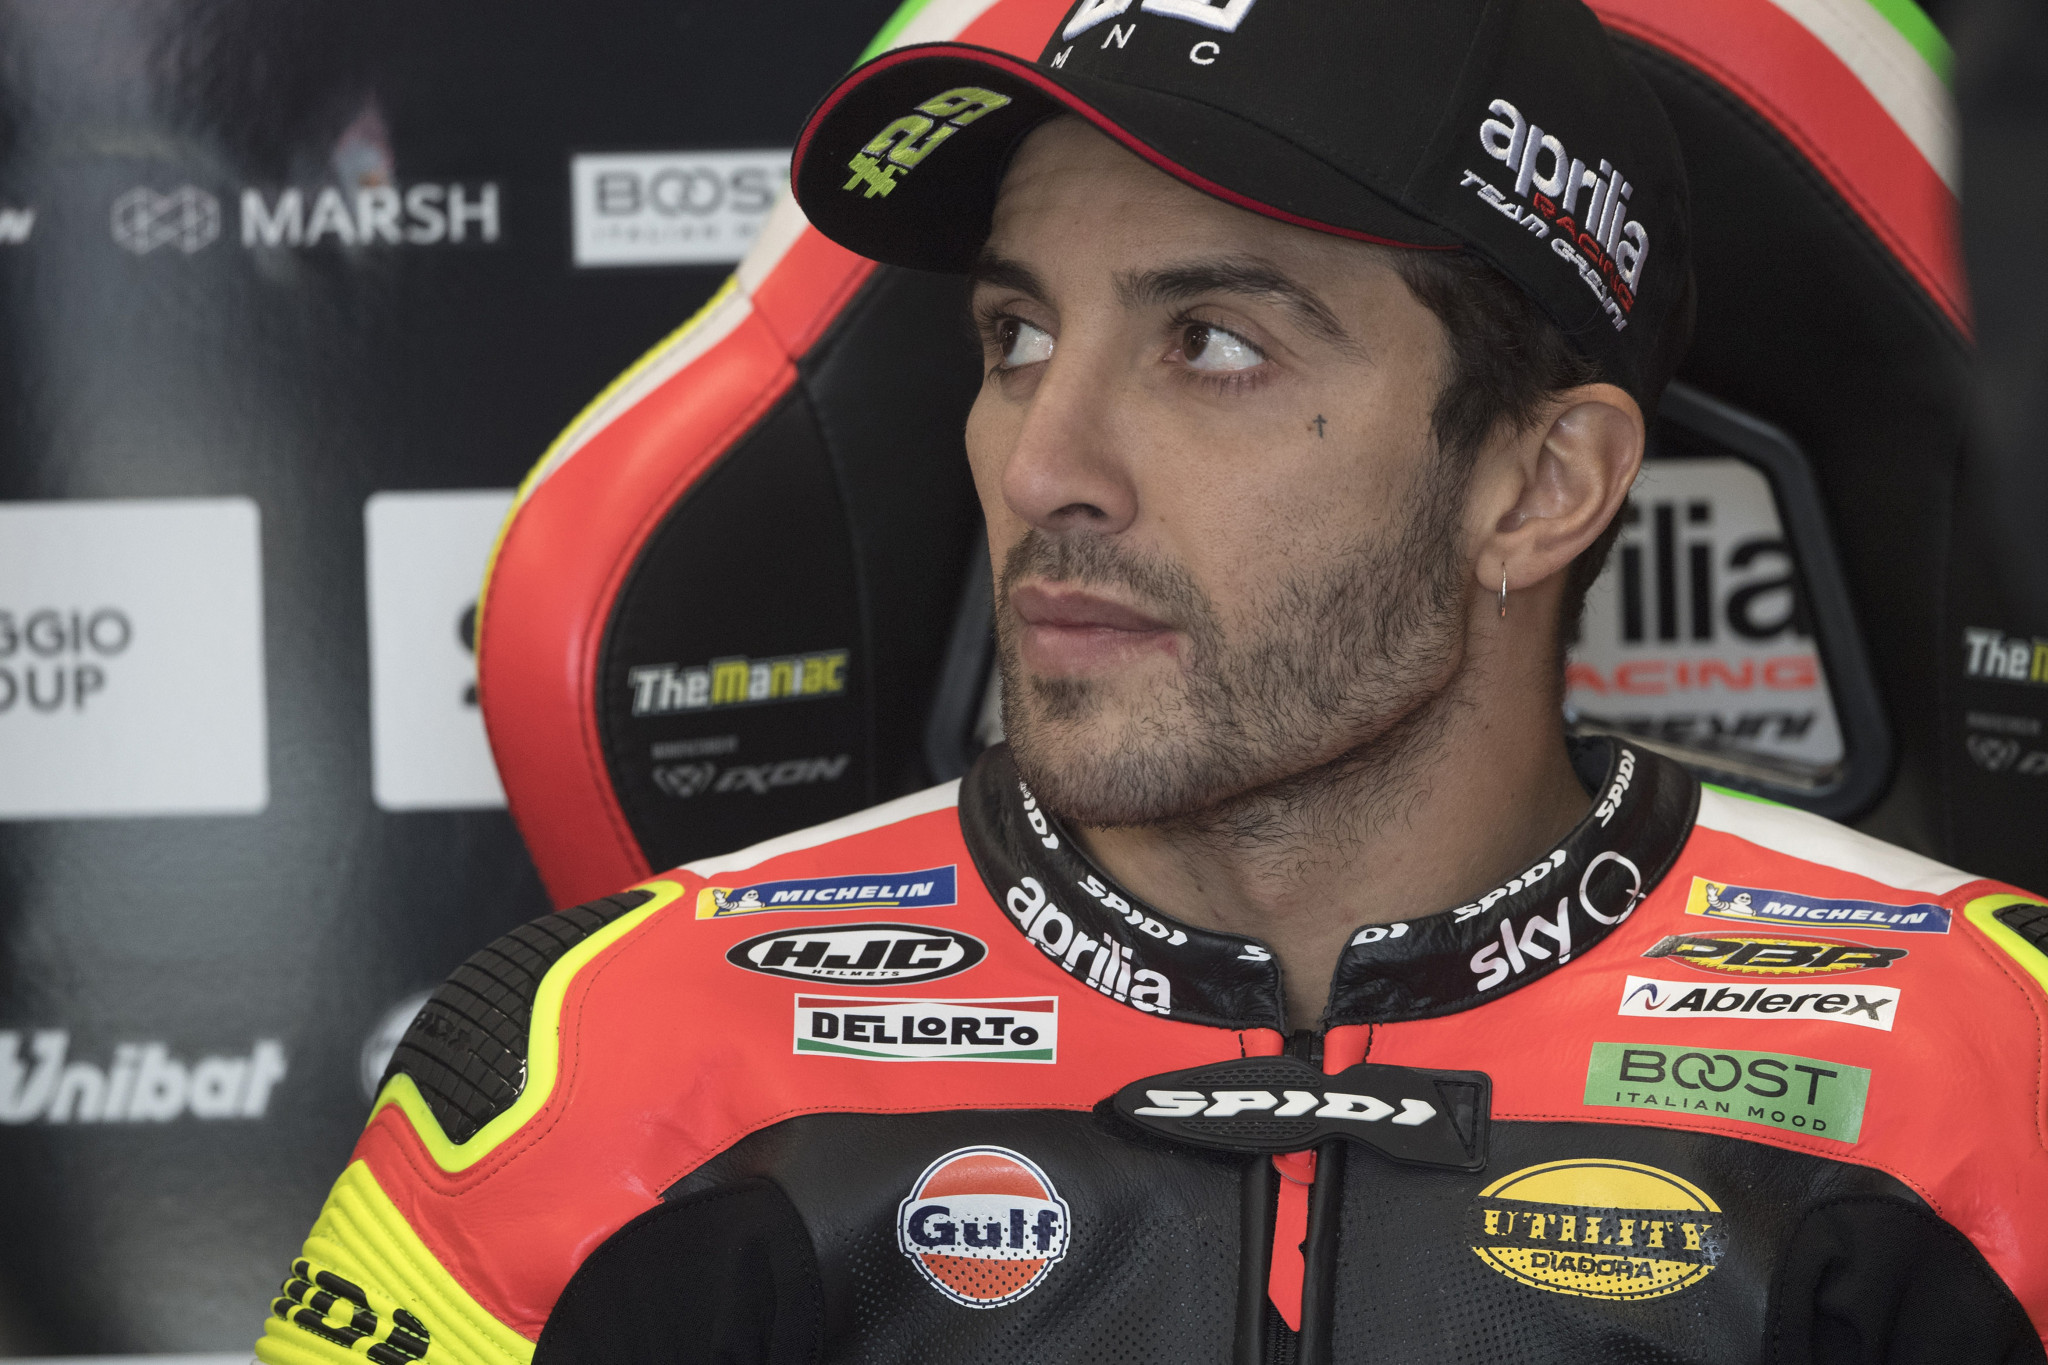 Andrea Iannone and his team are set to appeal the decision ©Getty Images